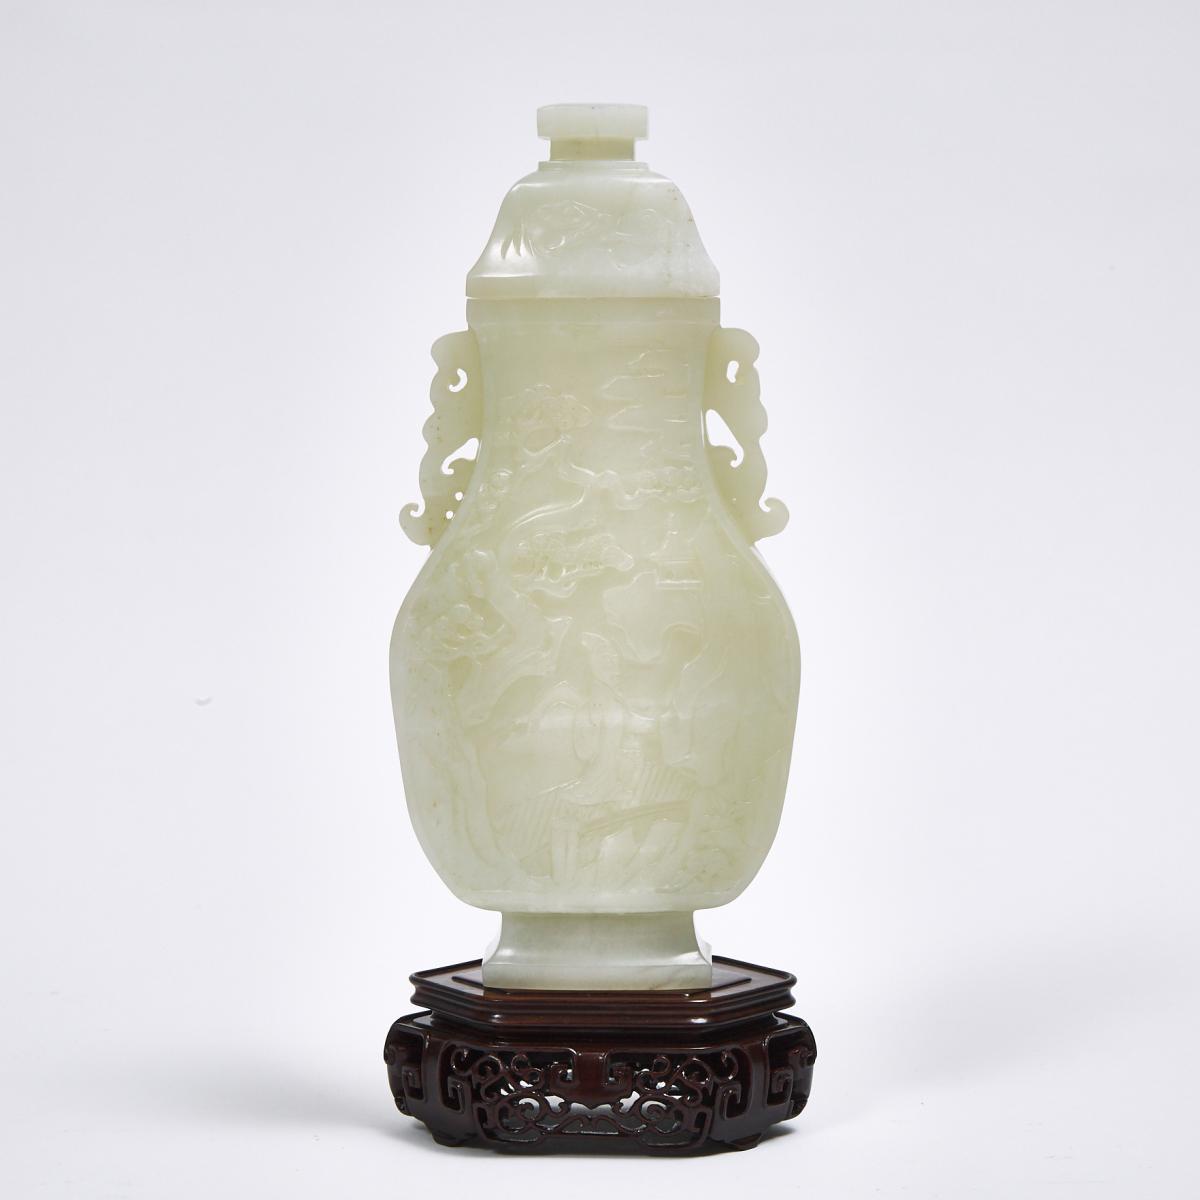 A White Jade 'Scholar and Pine' Vase and Cover, Qing Dynasty, 清 白玉雕'松下高士'紋瓶, height 9.6 in — 24.3 cm - Image 2 of 2